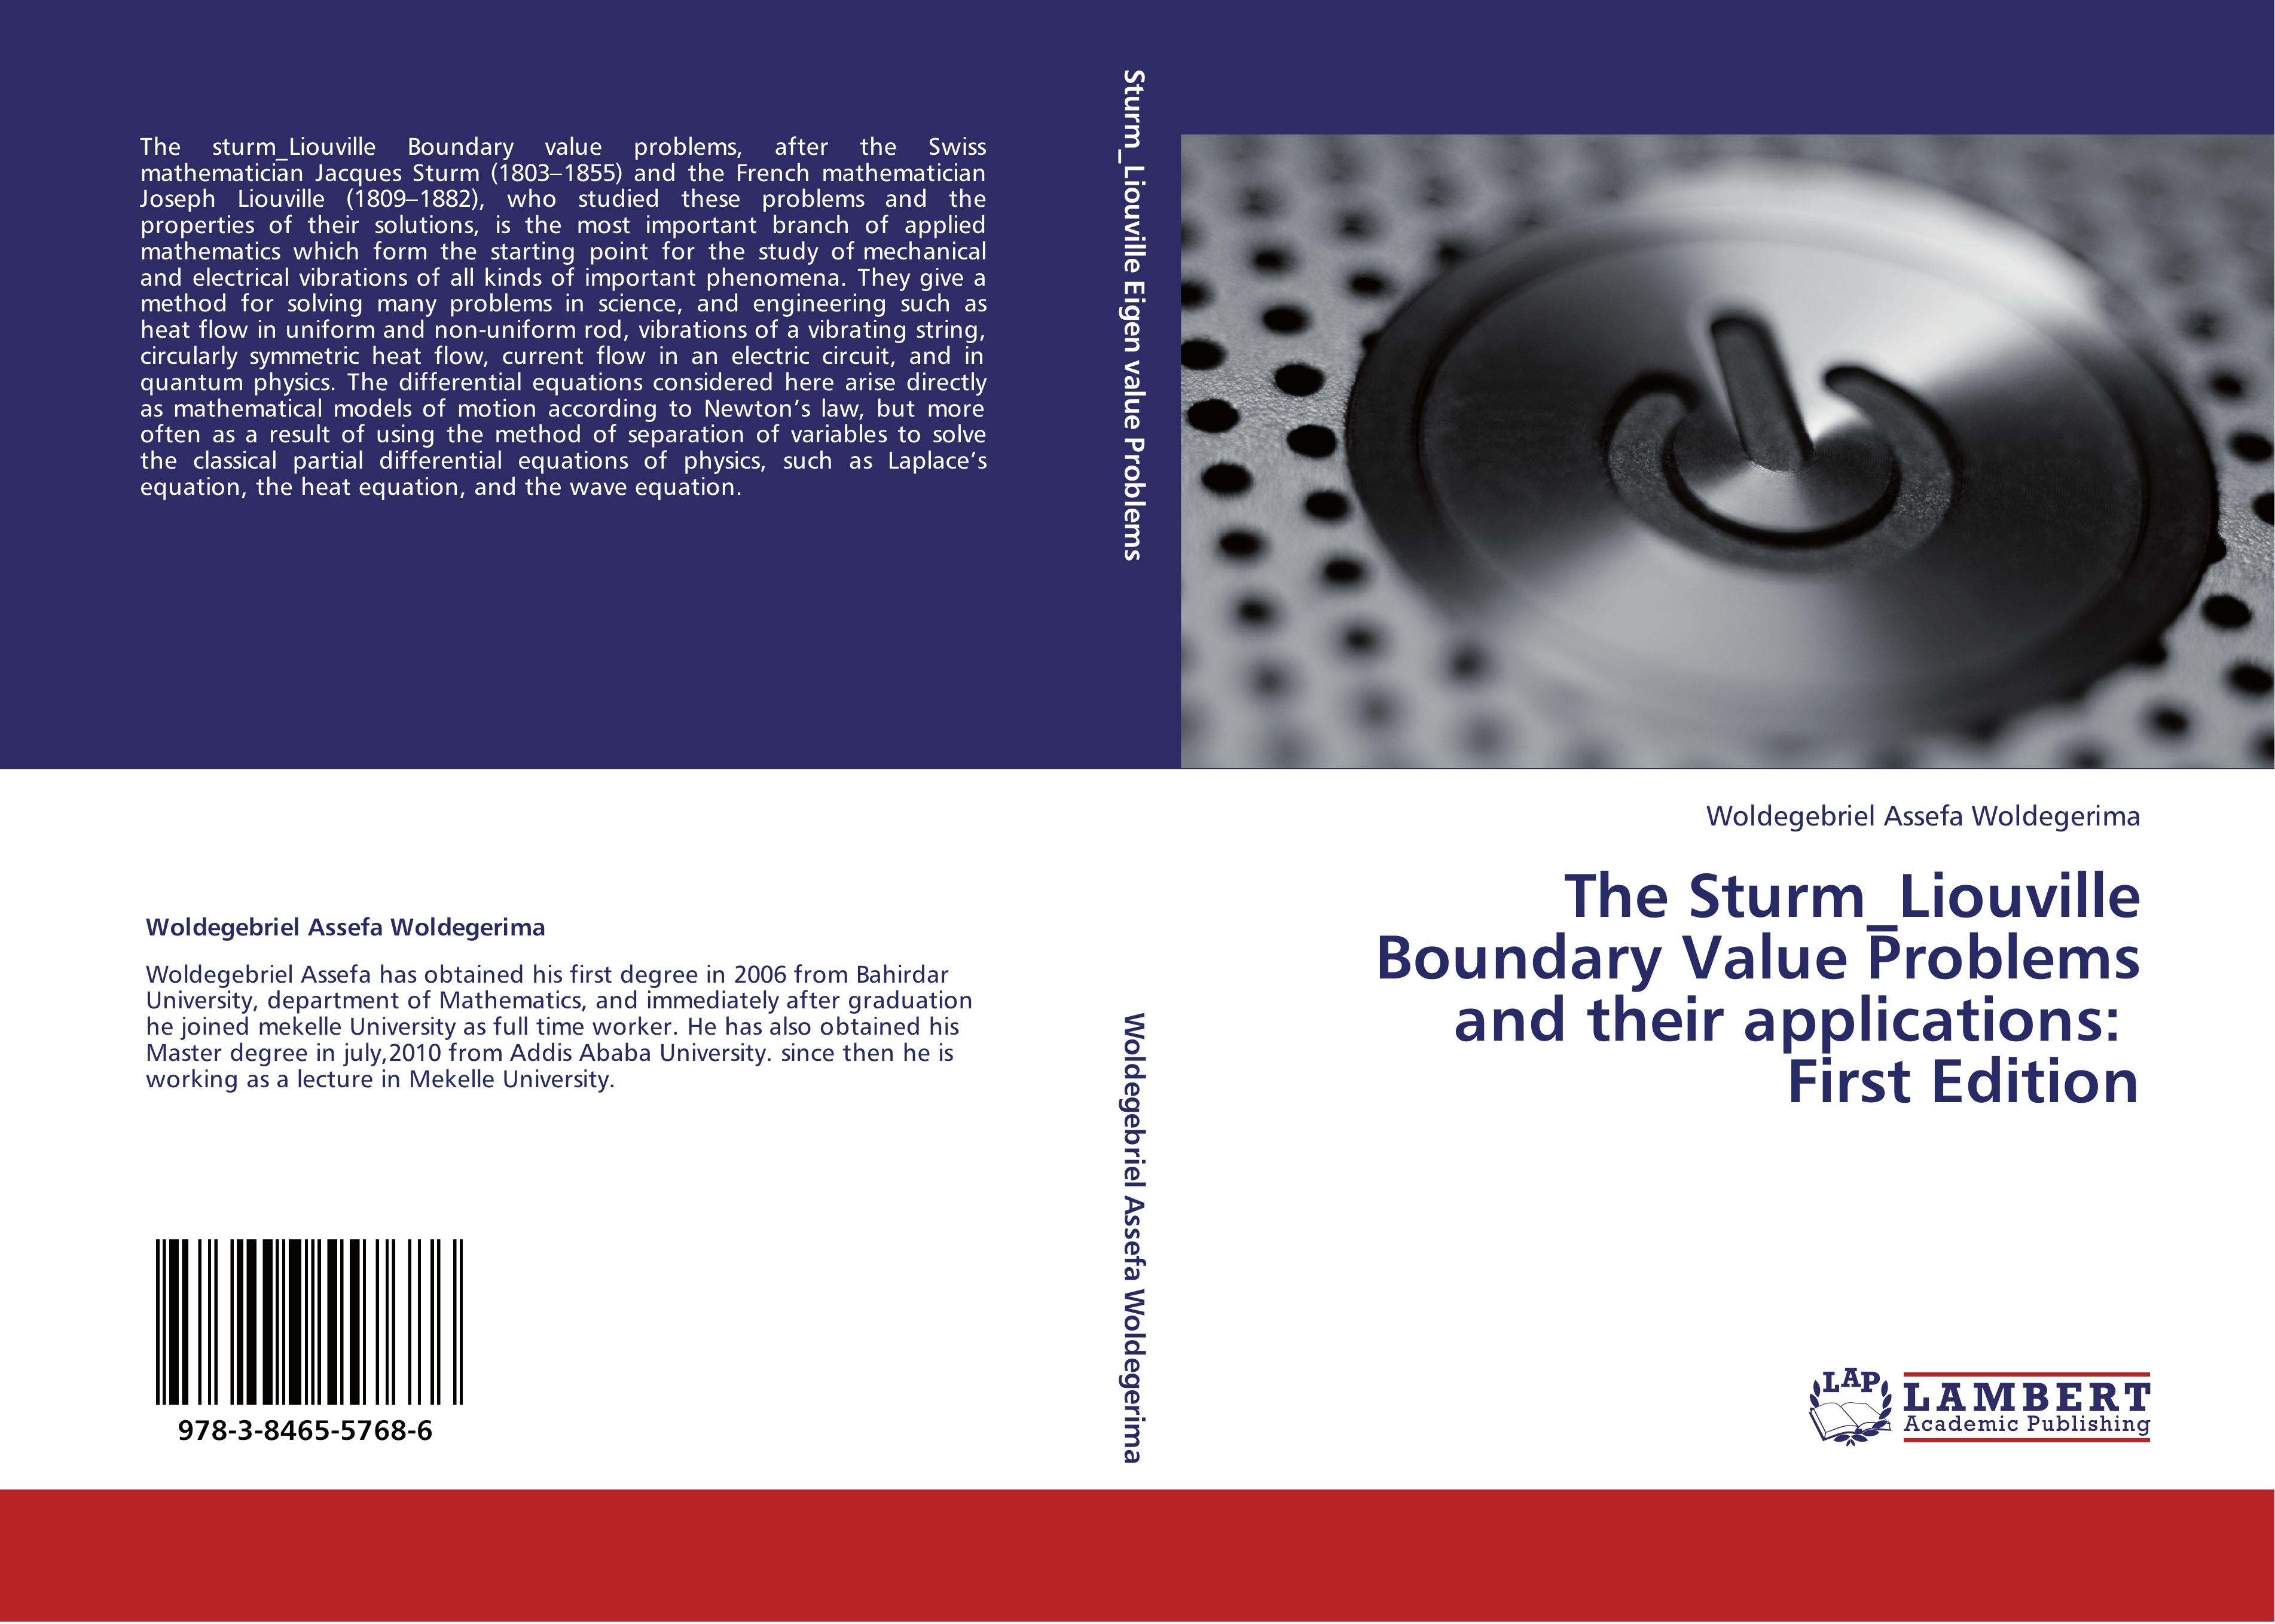 The Sturm_Liouville Boundary Value Problems and their applications: First Edition - Woldegebriel Assefa Woldegerima